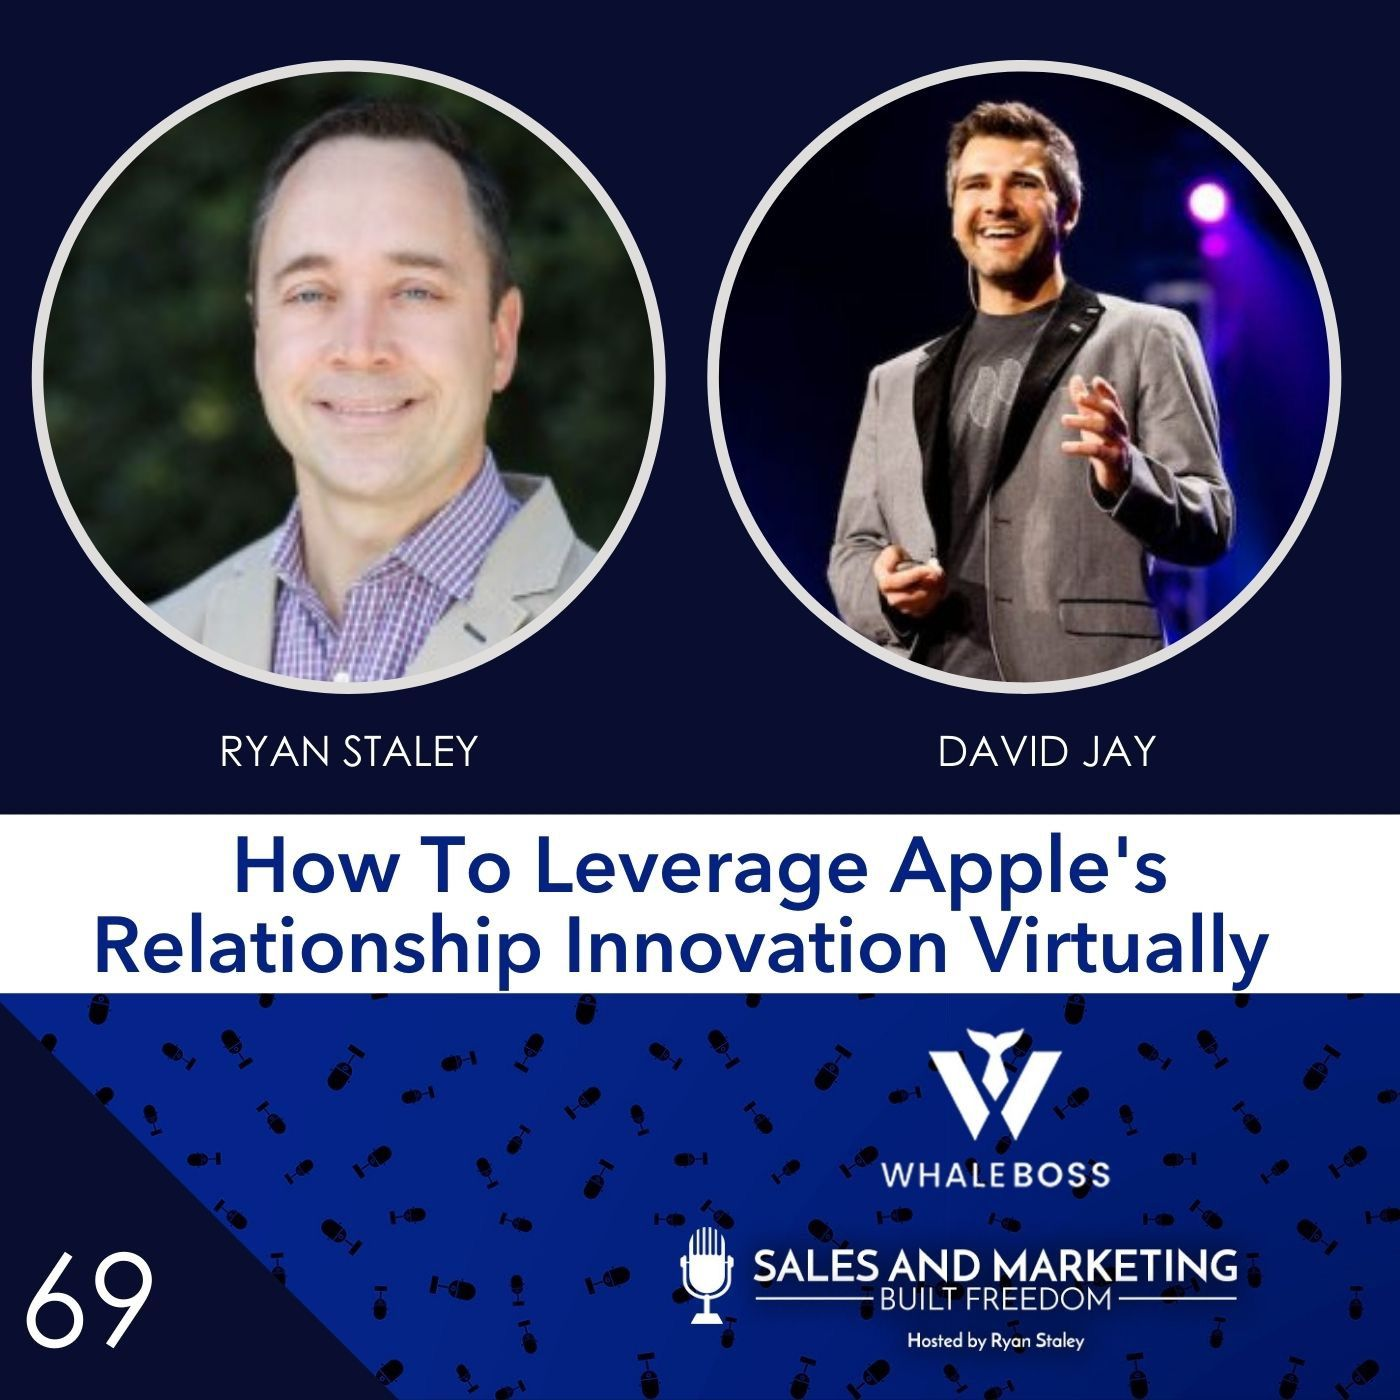 How To Leverage Apple's Relationship For Business Scale & Growth | David Jay